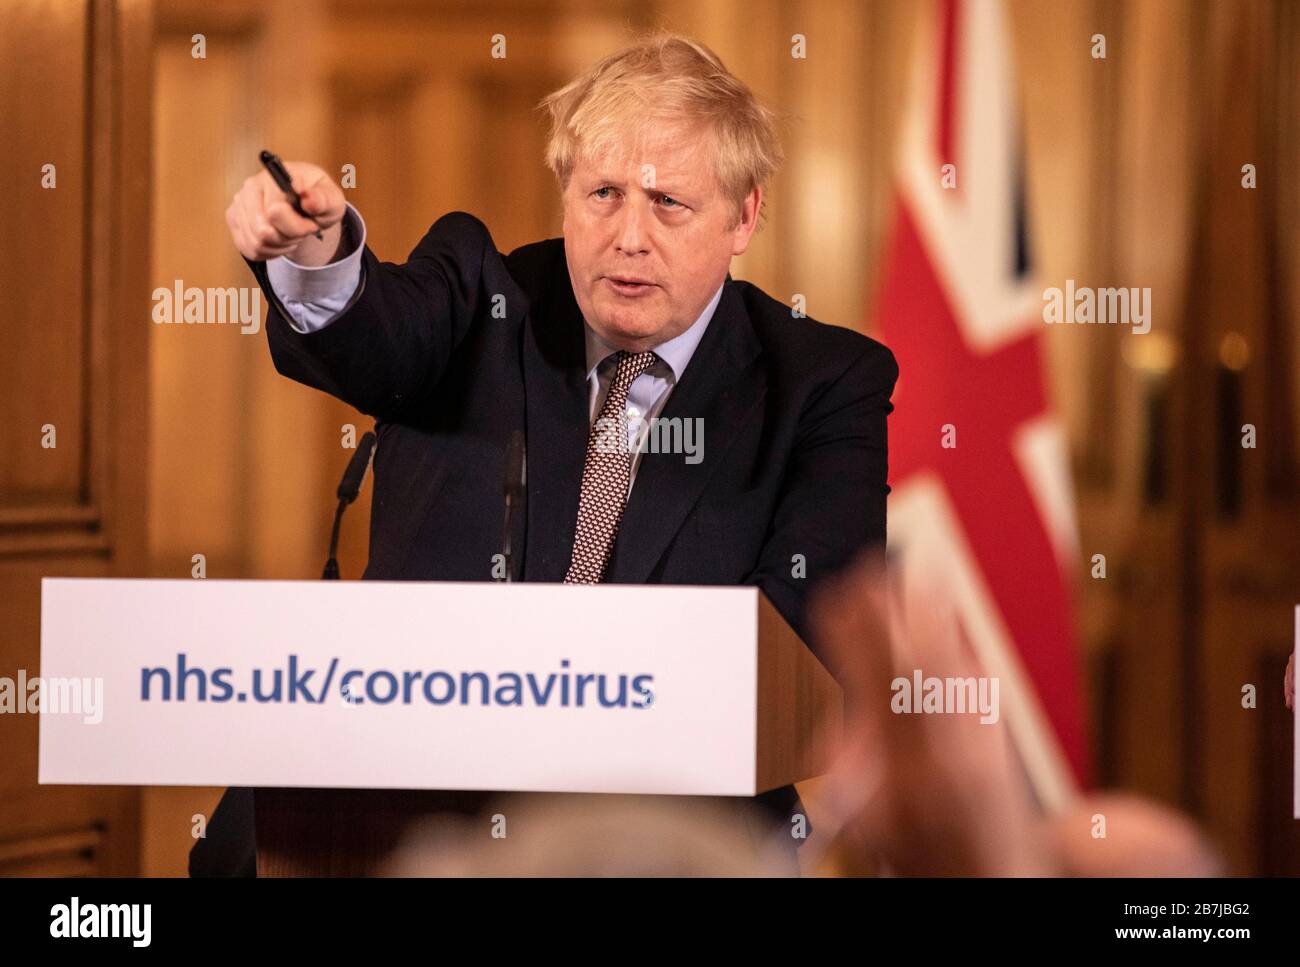 Prime Minister Boris Johnson speaking at a media briefing in Downing Street, London, on Coronavirus (COVID-19) after he had taken part in the government's COBRA meeting. Picture date: Monday March 16, 2020. See PA story HEALTH Coronavirus. Photo credit should read: Richard Pohle/The Times/PA Wire Stock Photo